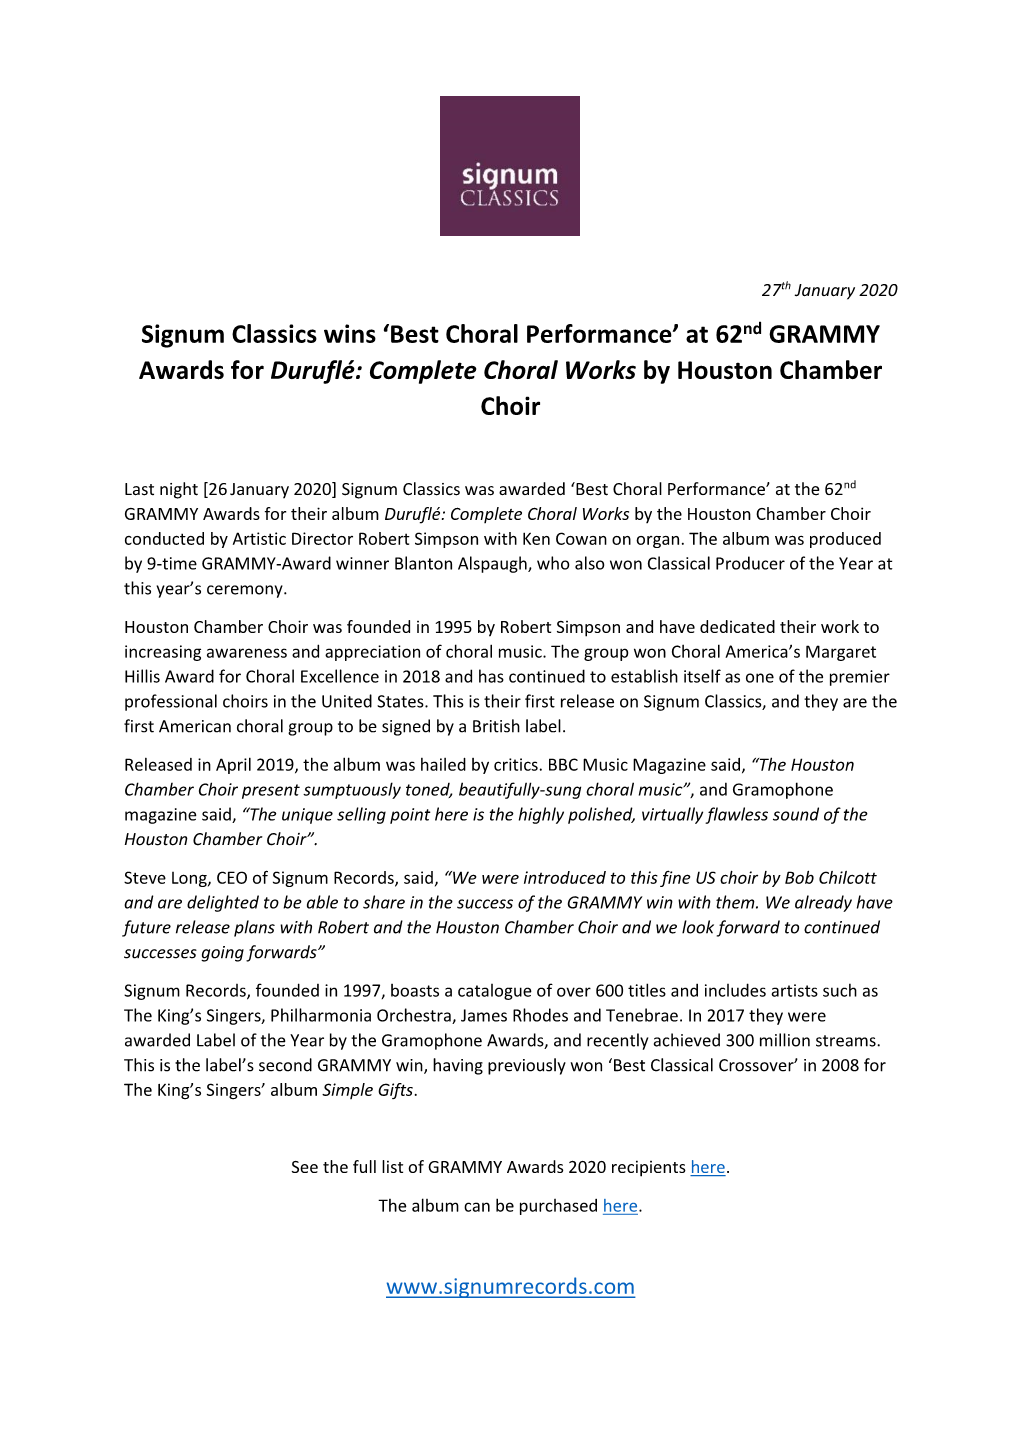 Signum Classics Wins ‘Best Choral Performance’ at 62Nd GRAMMY Awards for Duruflé: Complete Choral Works by Houston Chamber Choir